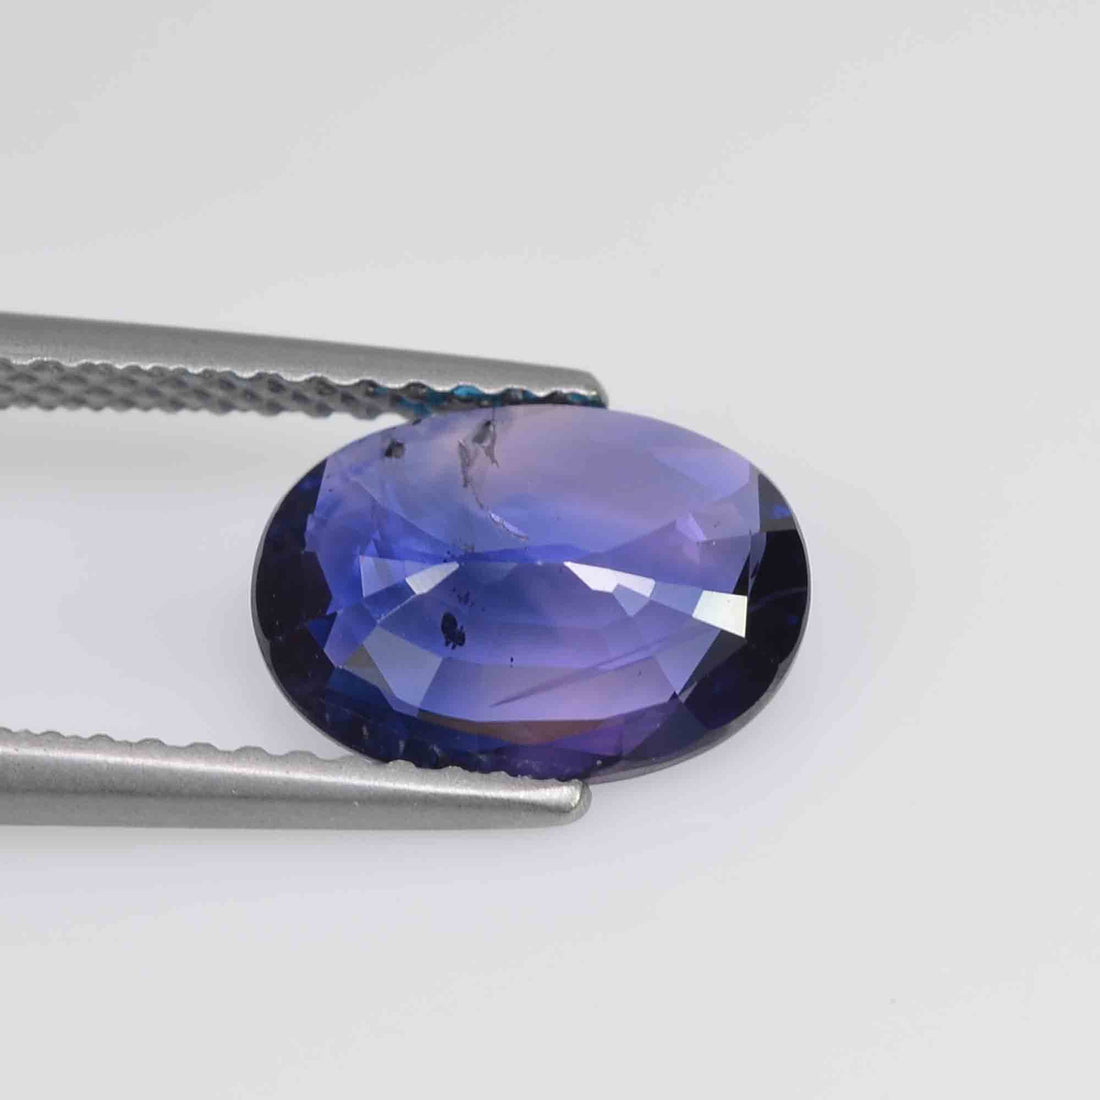 2.04 cts Natural Fancy Bi-Color Sapphire Loose Gemstone oval Cut